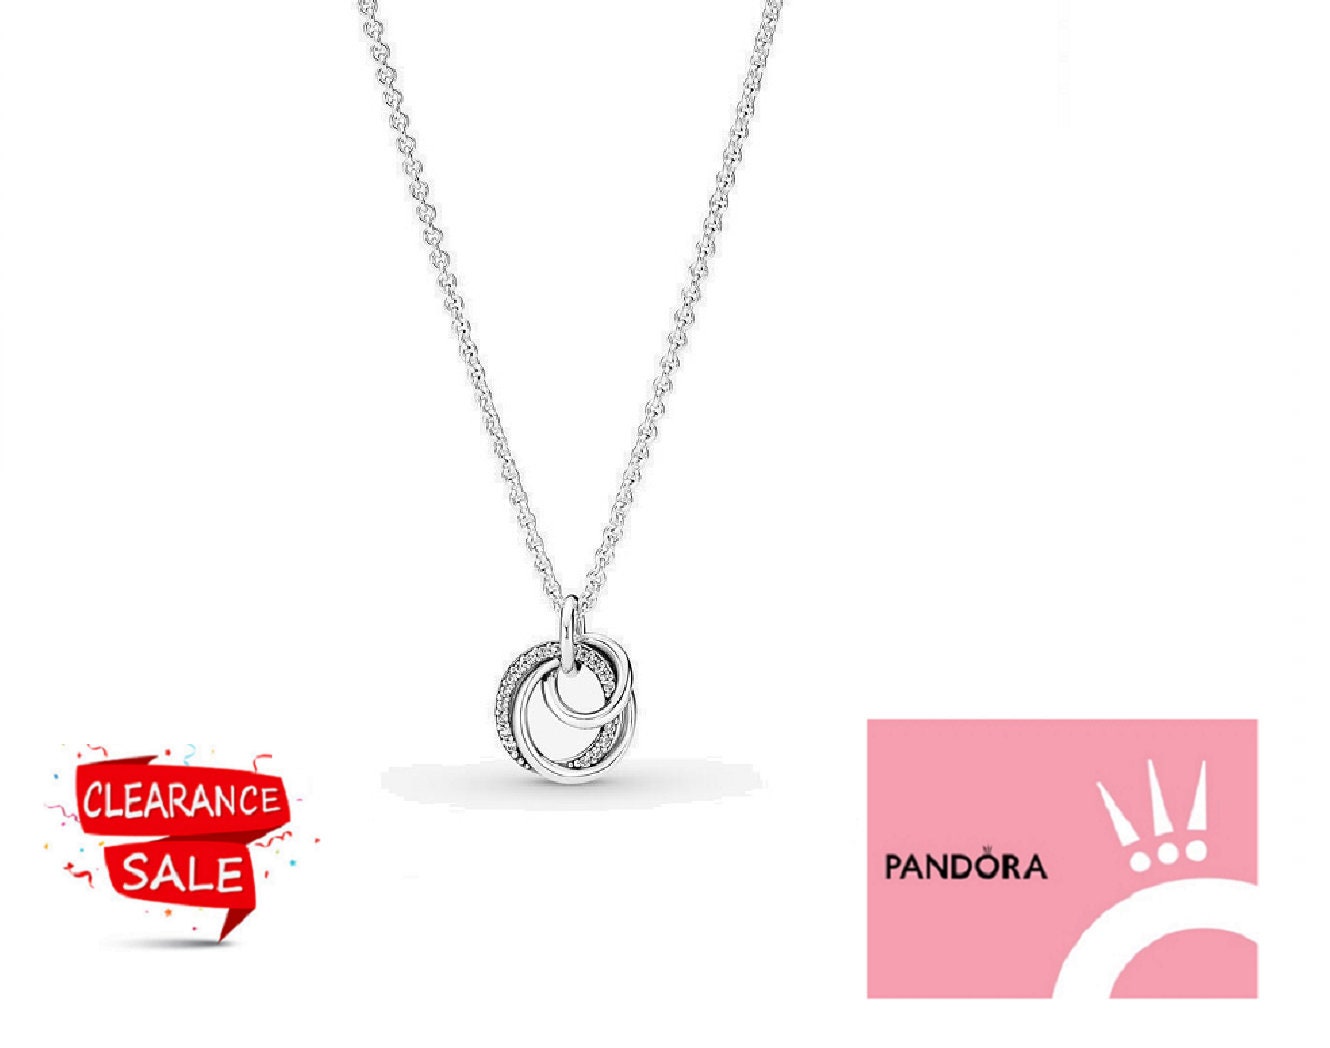 PANDORA NECKLACES — The Diamond Center: Where Wisconsin Gets Engaged